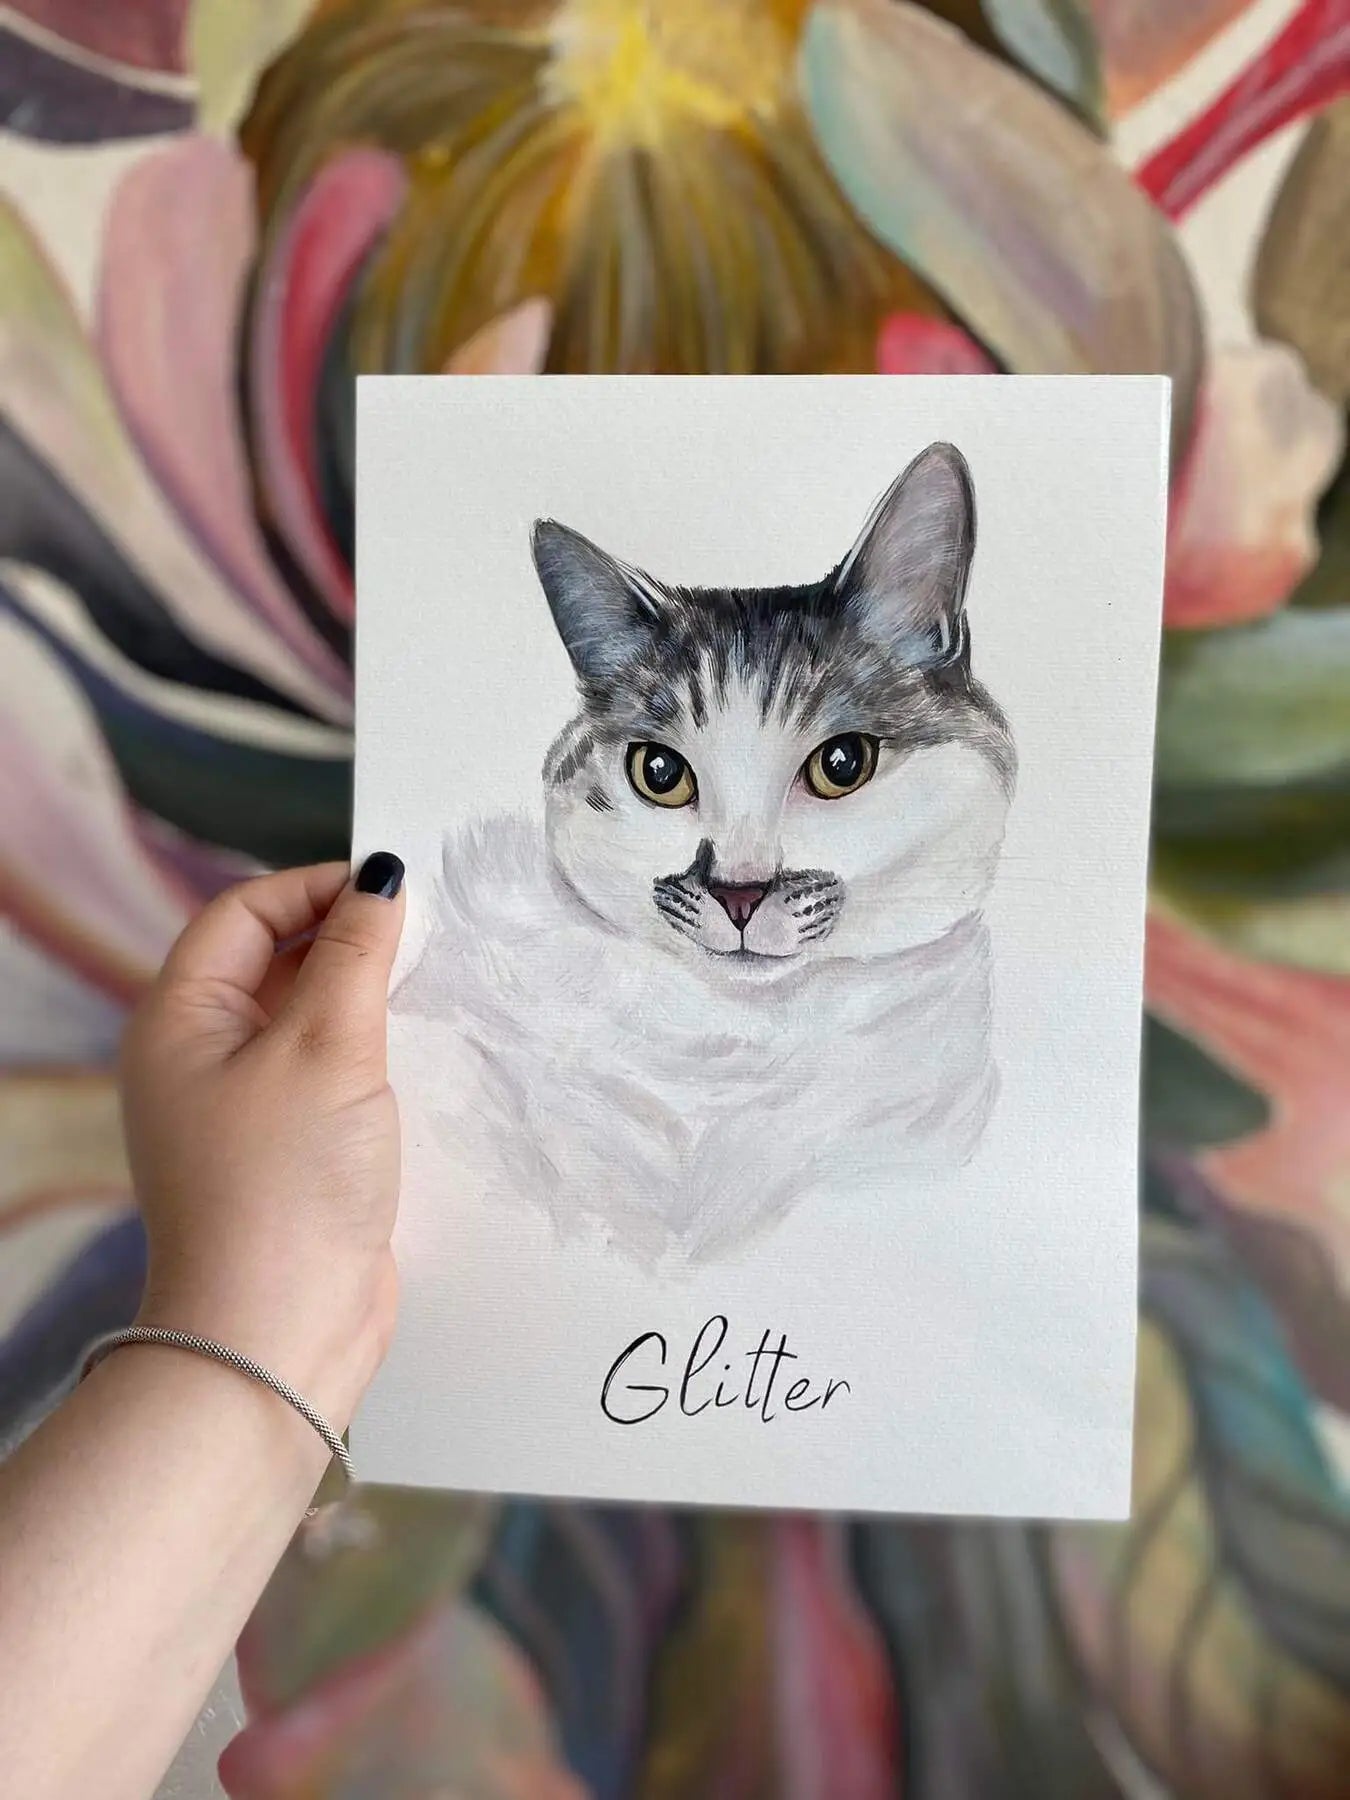 A touch of artistry: A custom pet portrait, merging the elegance of a dog and the grace of a cat in one captivating image.